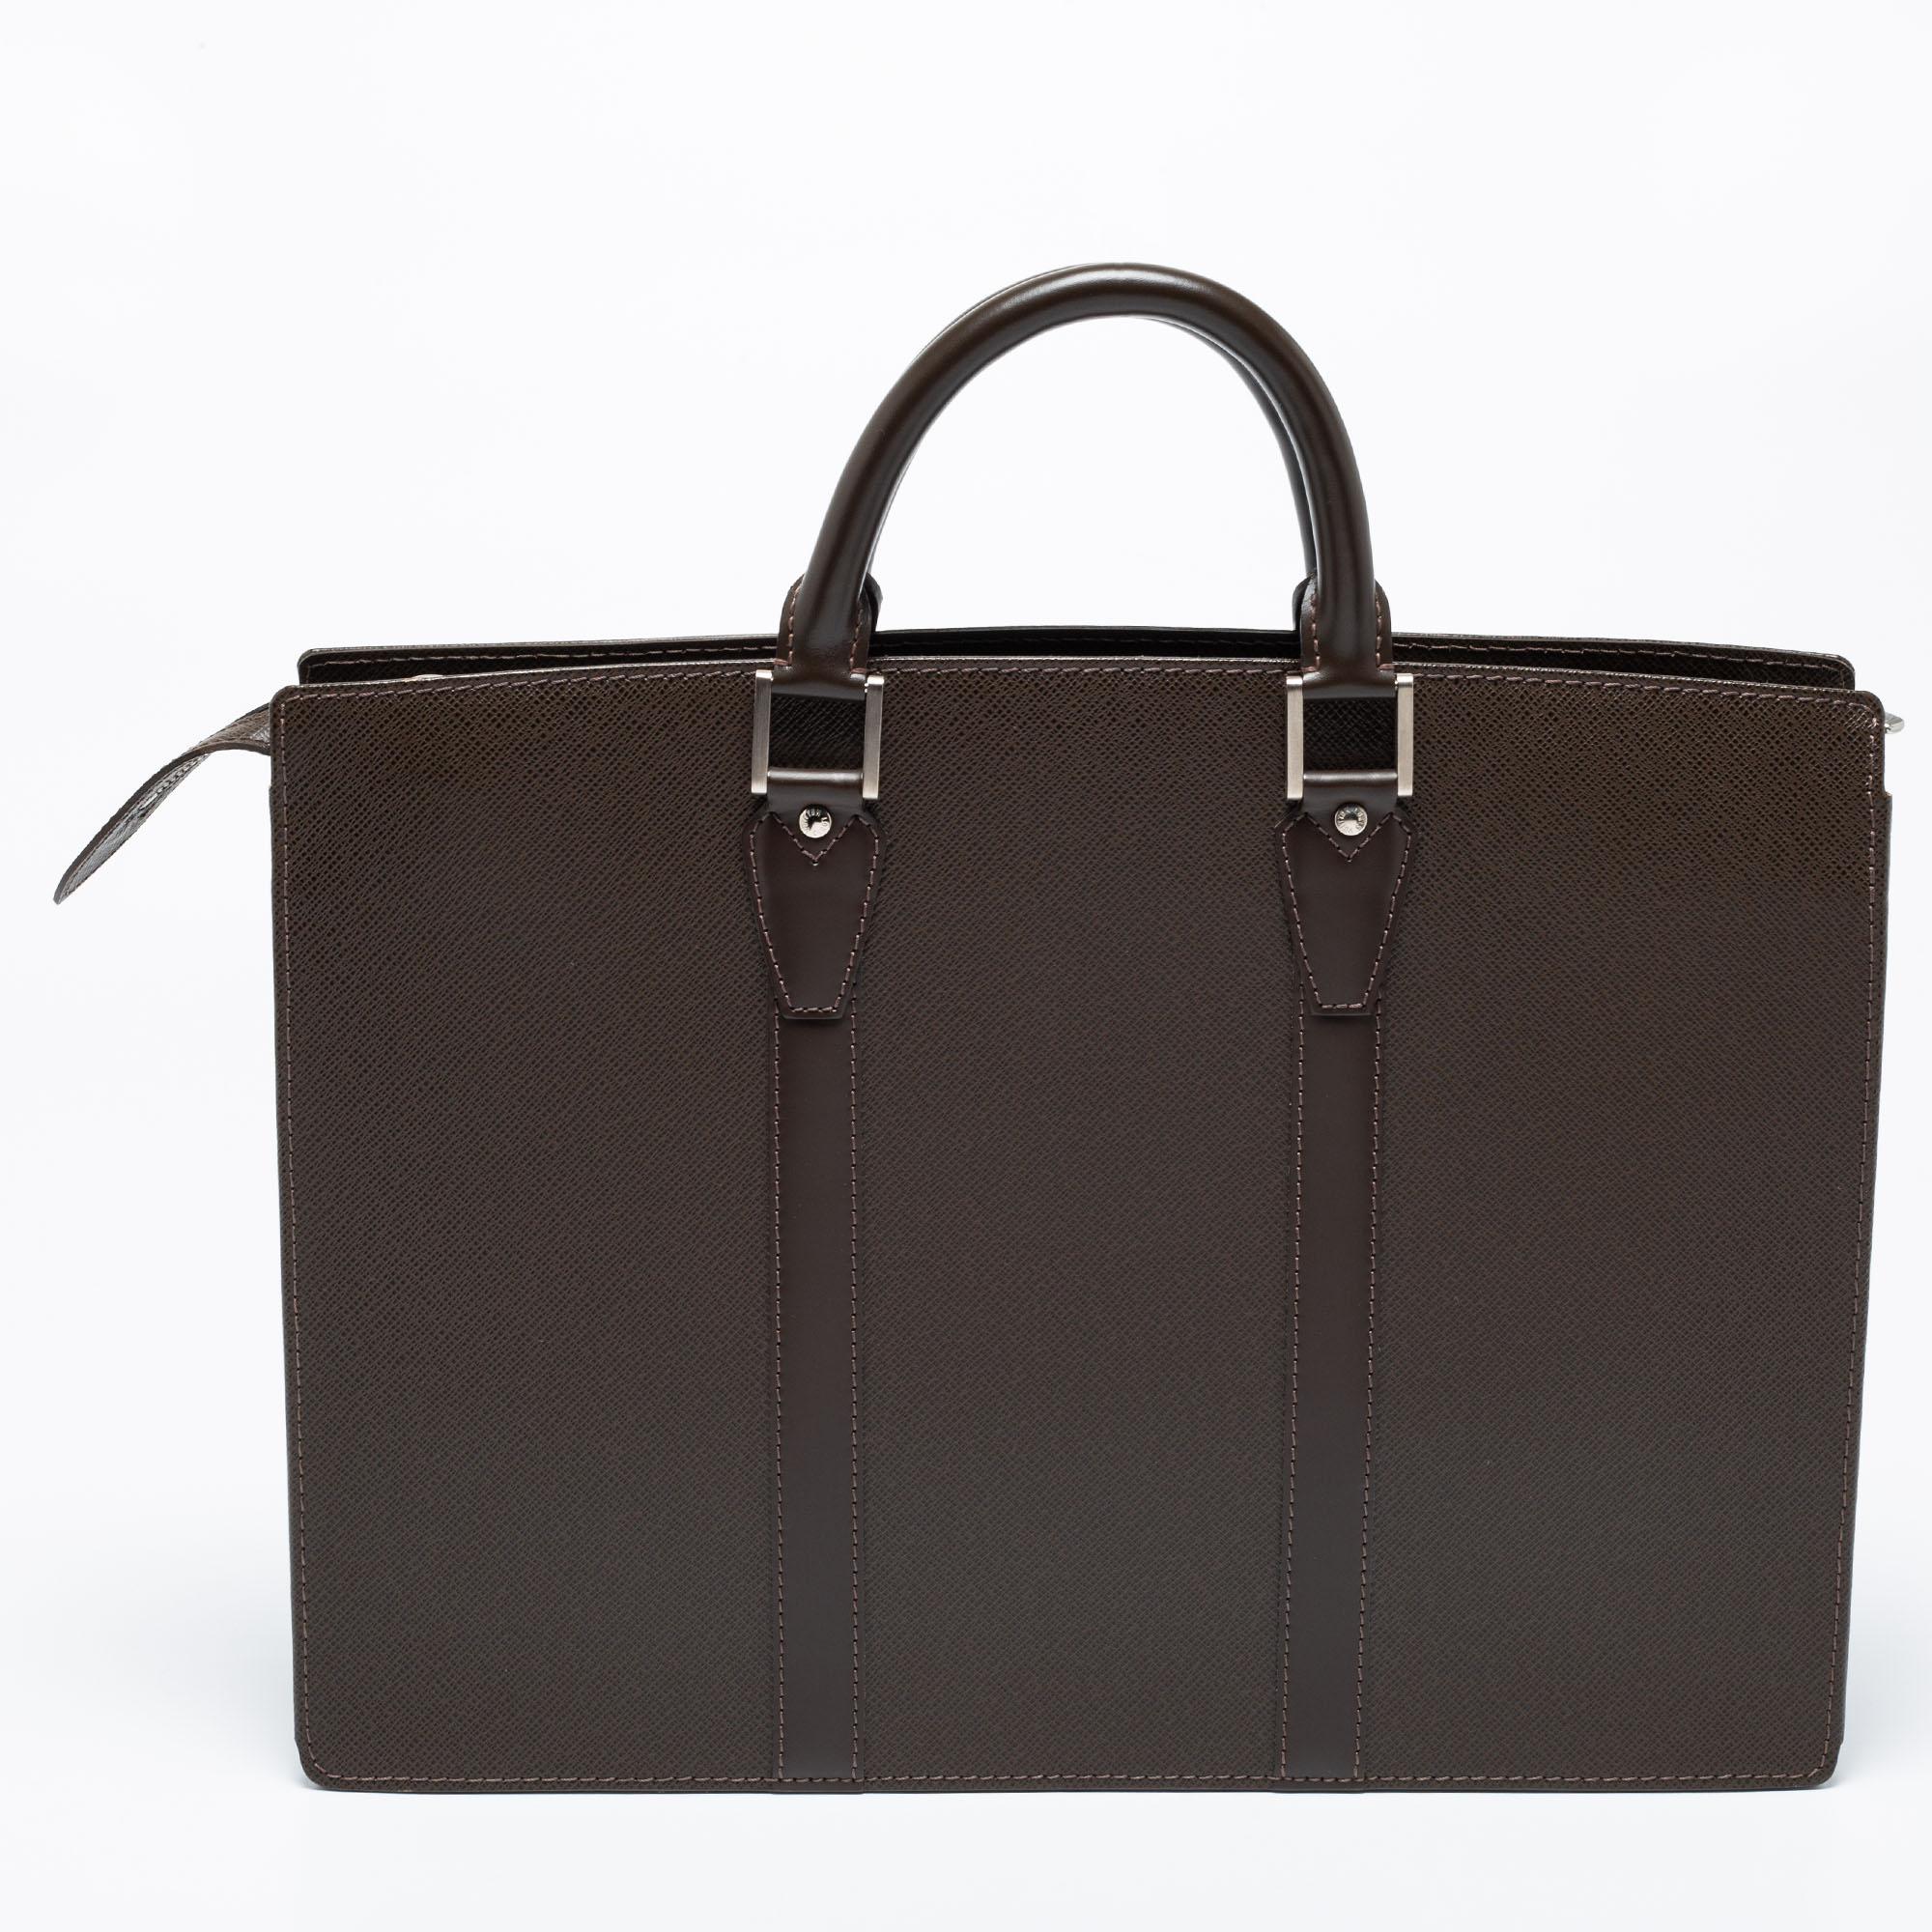 This Louis Vuitton briefcase brings such a grand shape that you're sure to look fashionable whenever you carry it. It has been crafted from brown Taiga leather and is designed with two top handles and canvas compartments where you can carry your